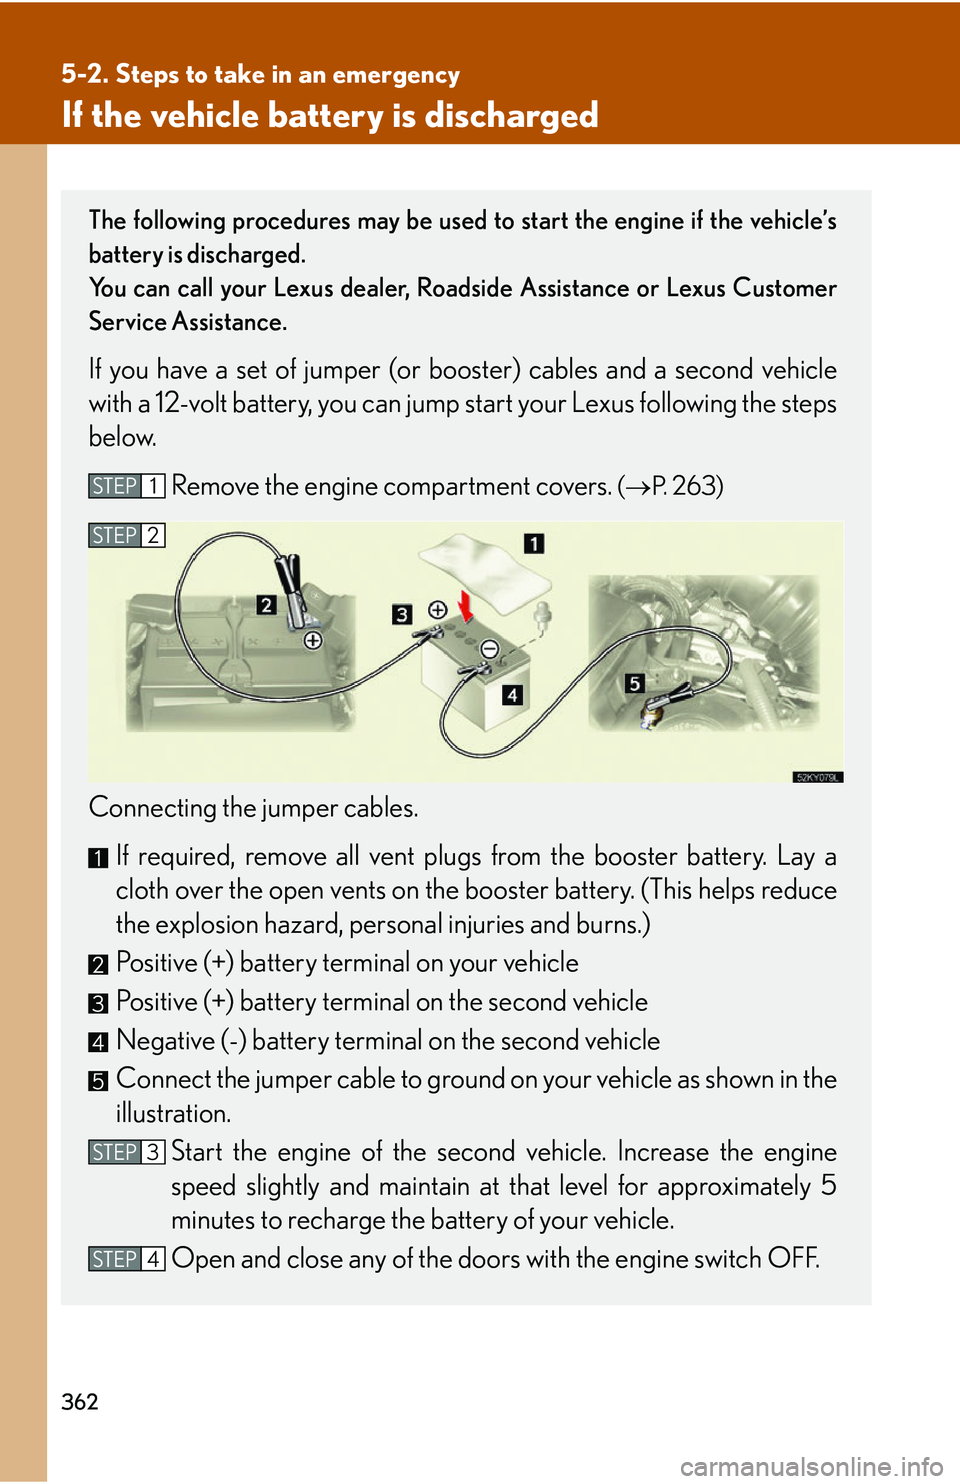 Lexus IS250 2006  Other Functions / LEXUS 2006 IS350/250 THROUGH APRIL 2006 PROD. OWNERS MANUAL (OM53508U) 362
5-2. Steps to take in an emergency
If the vehicle battery is discharged
The following procedures may be used to start the engine if the vehicle’s
battery is discharged.
You can call your Lexus d